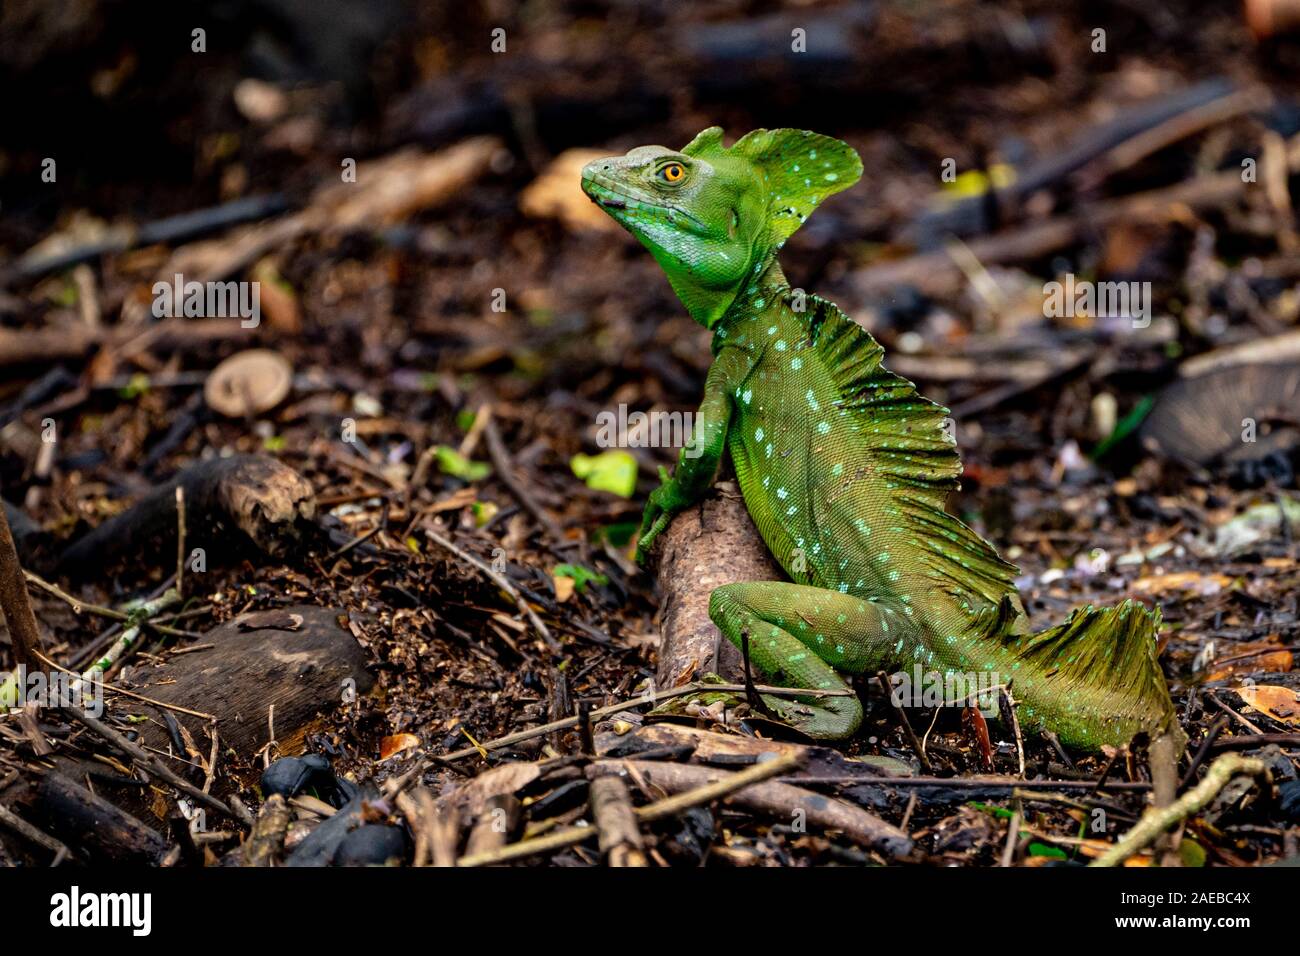 Male Plumed basilisk (Basiliscus plumifrons) camouflaged amongst foliage. This lizard is found in the tropical forests of Central America. It is famed Stock Photo